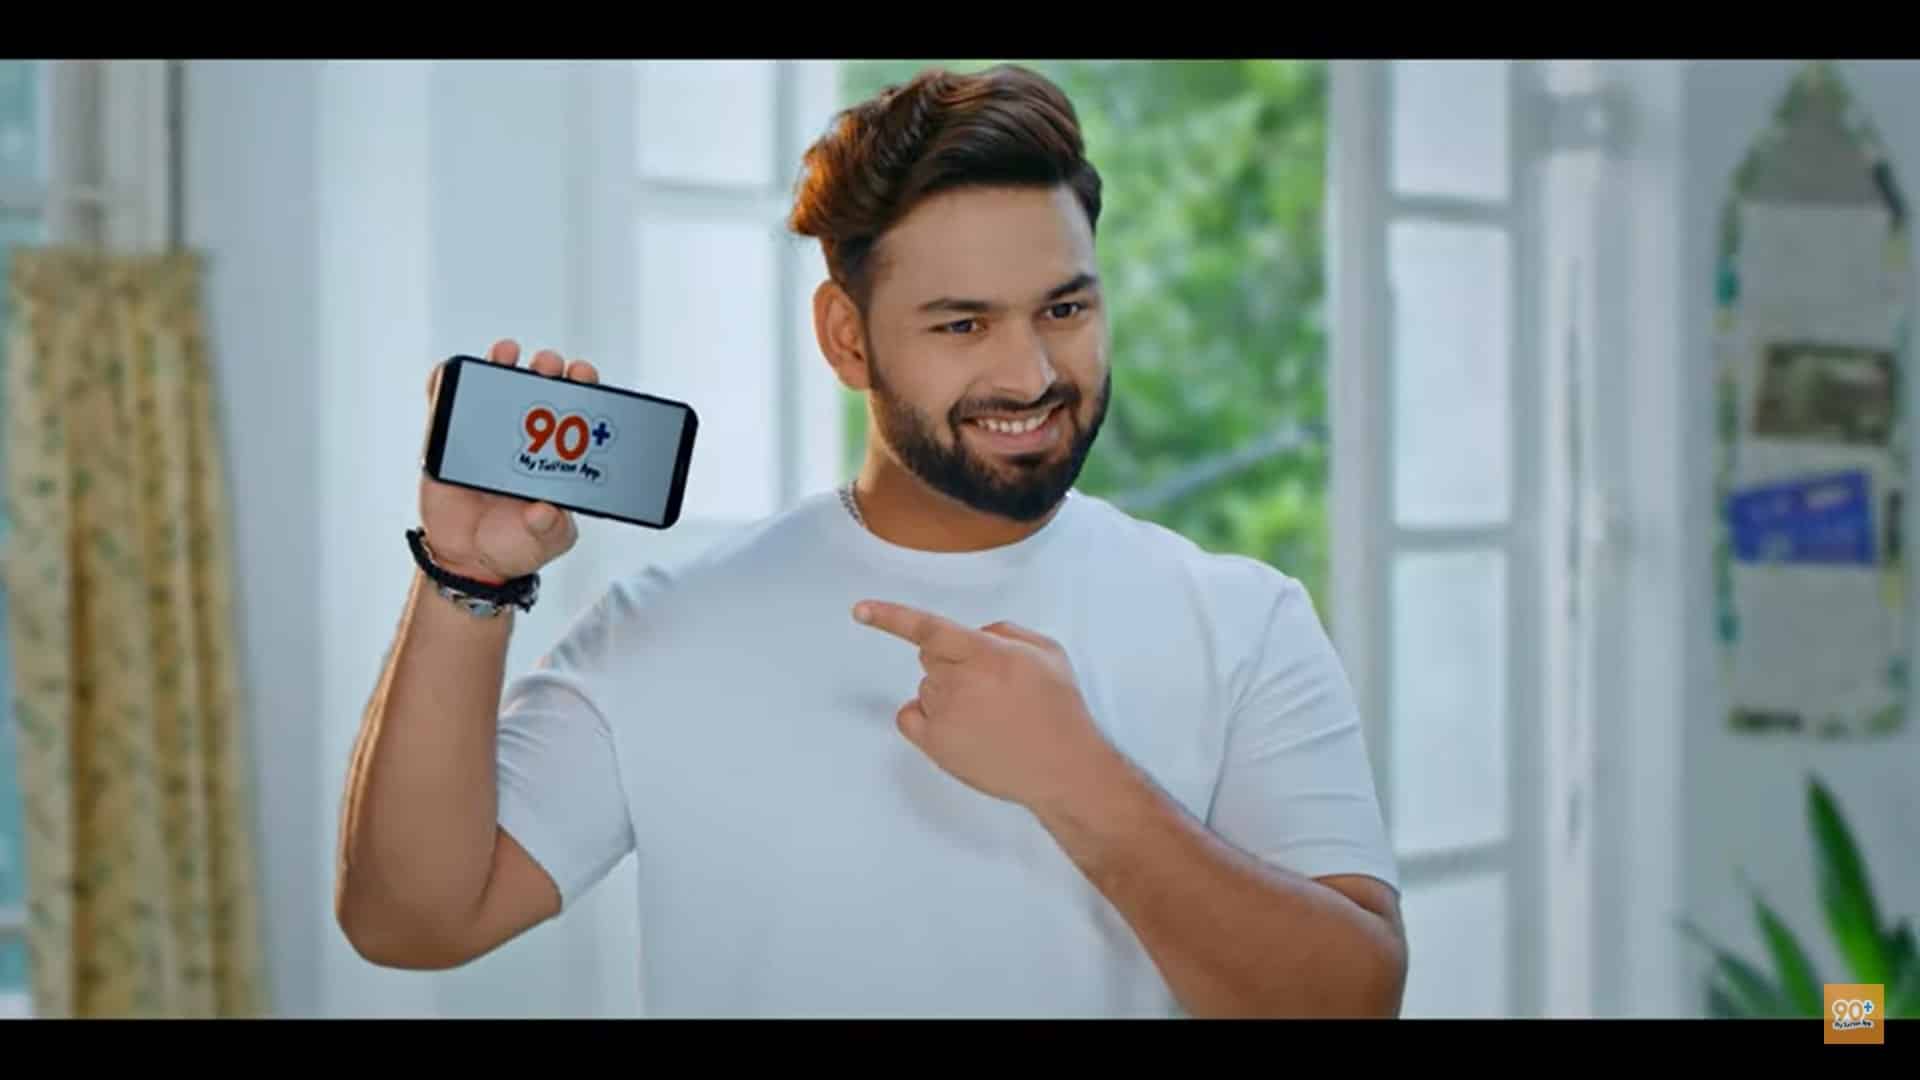 Rishabh Pant partners 90+ My Tuition App to promote fun and affordable learning